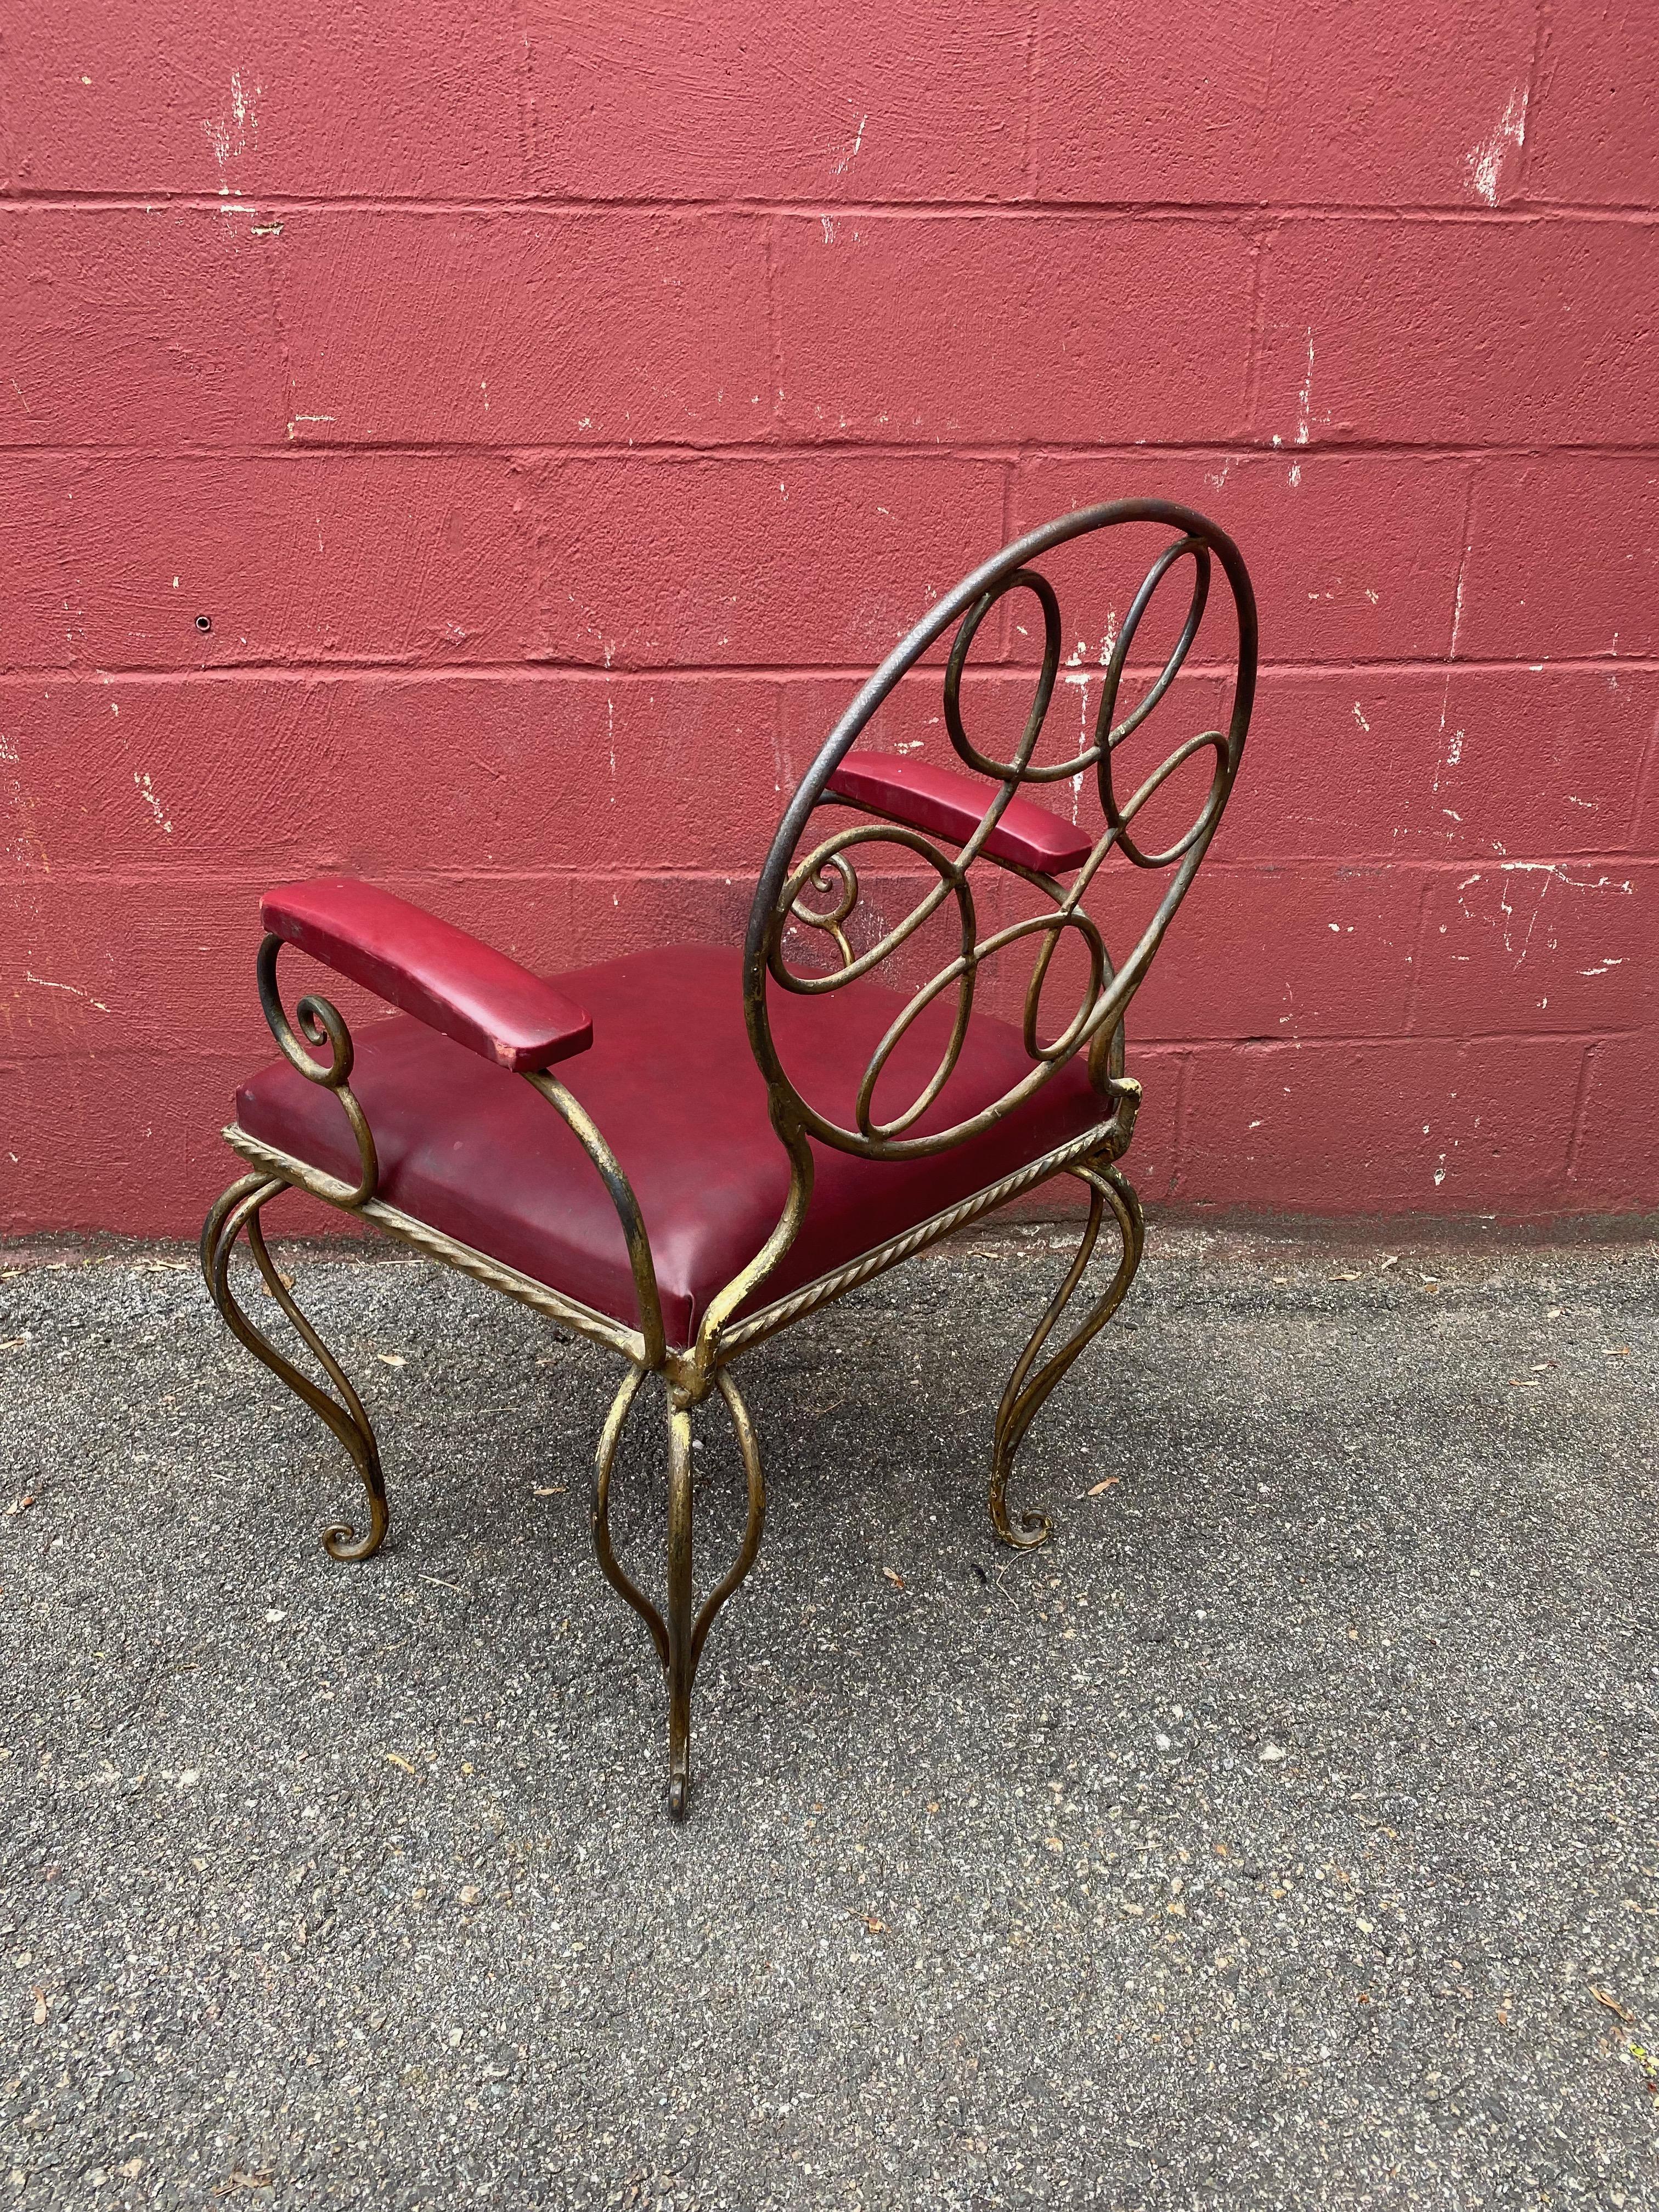 Ornate Wrought Iron Armchair in Oxblood Red Vinyl For Sale 3